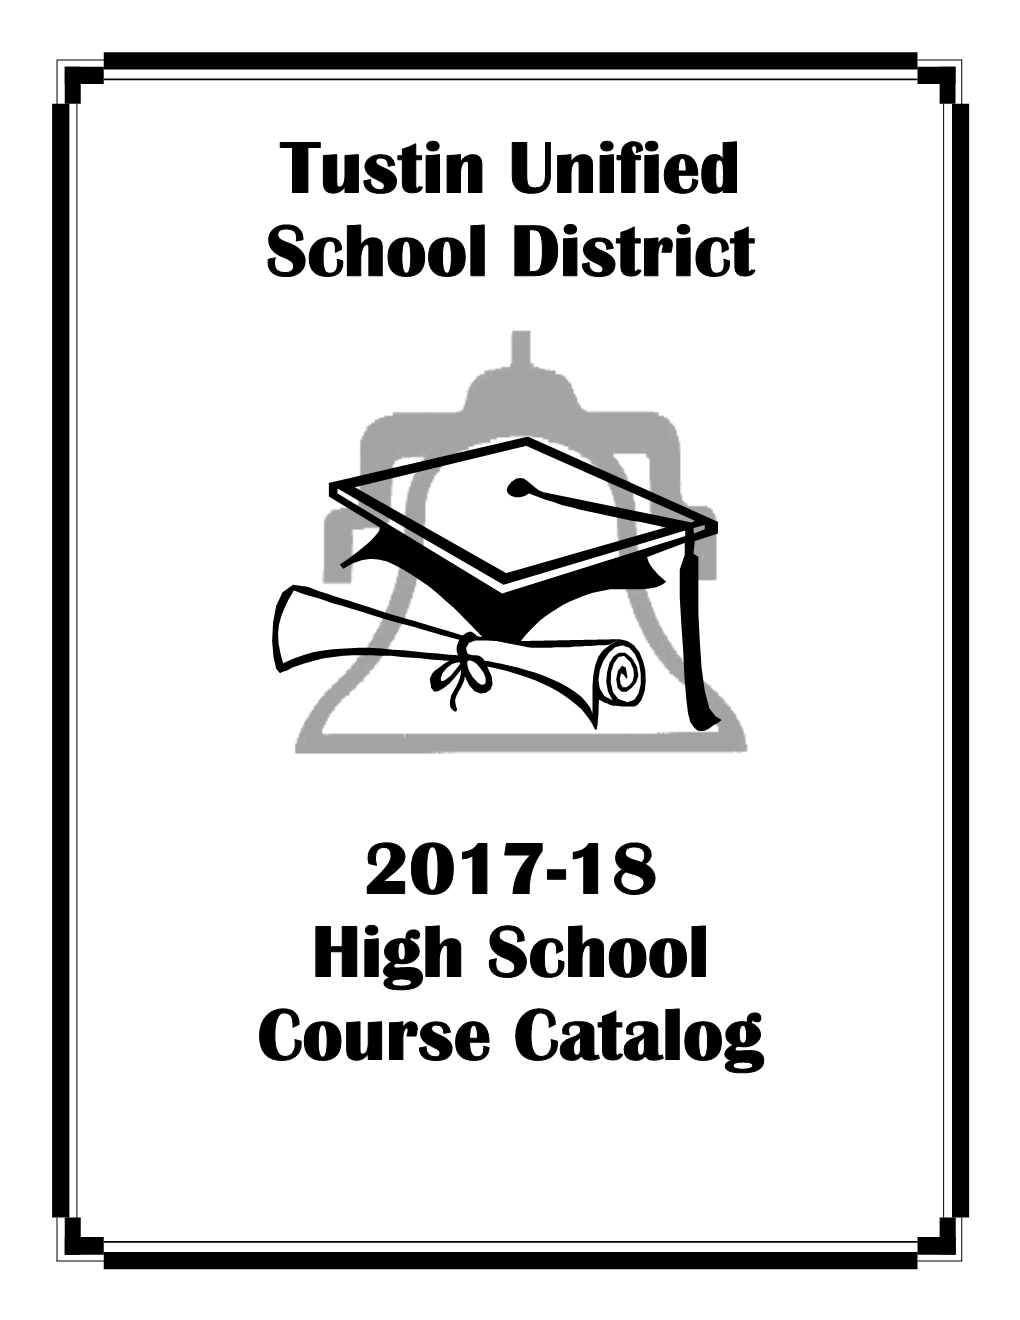 Tustin Unified School District 2017-18 High School Course Catalog